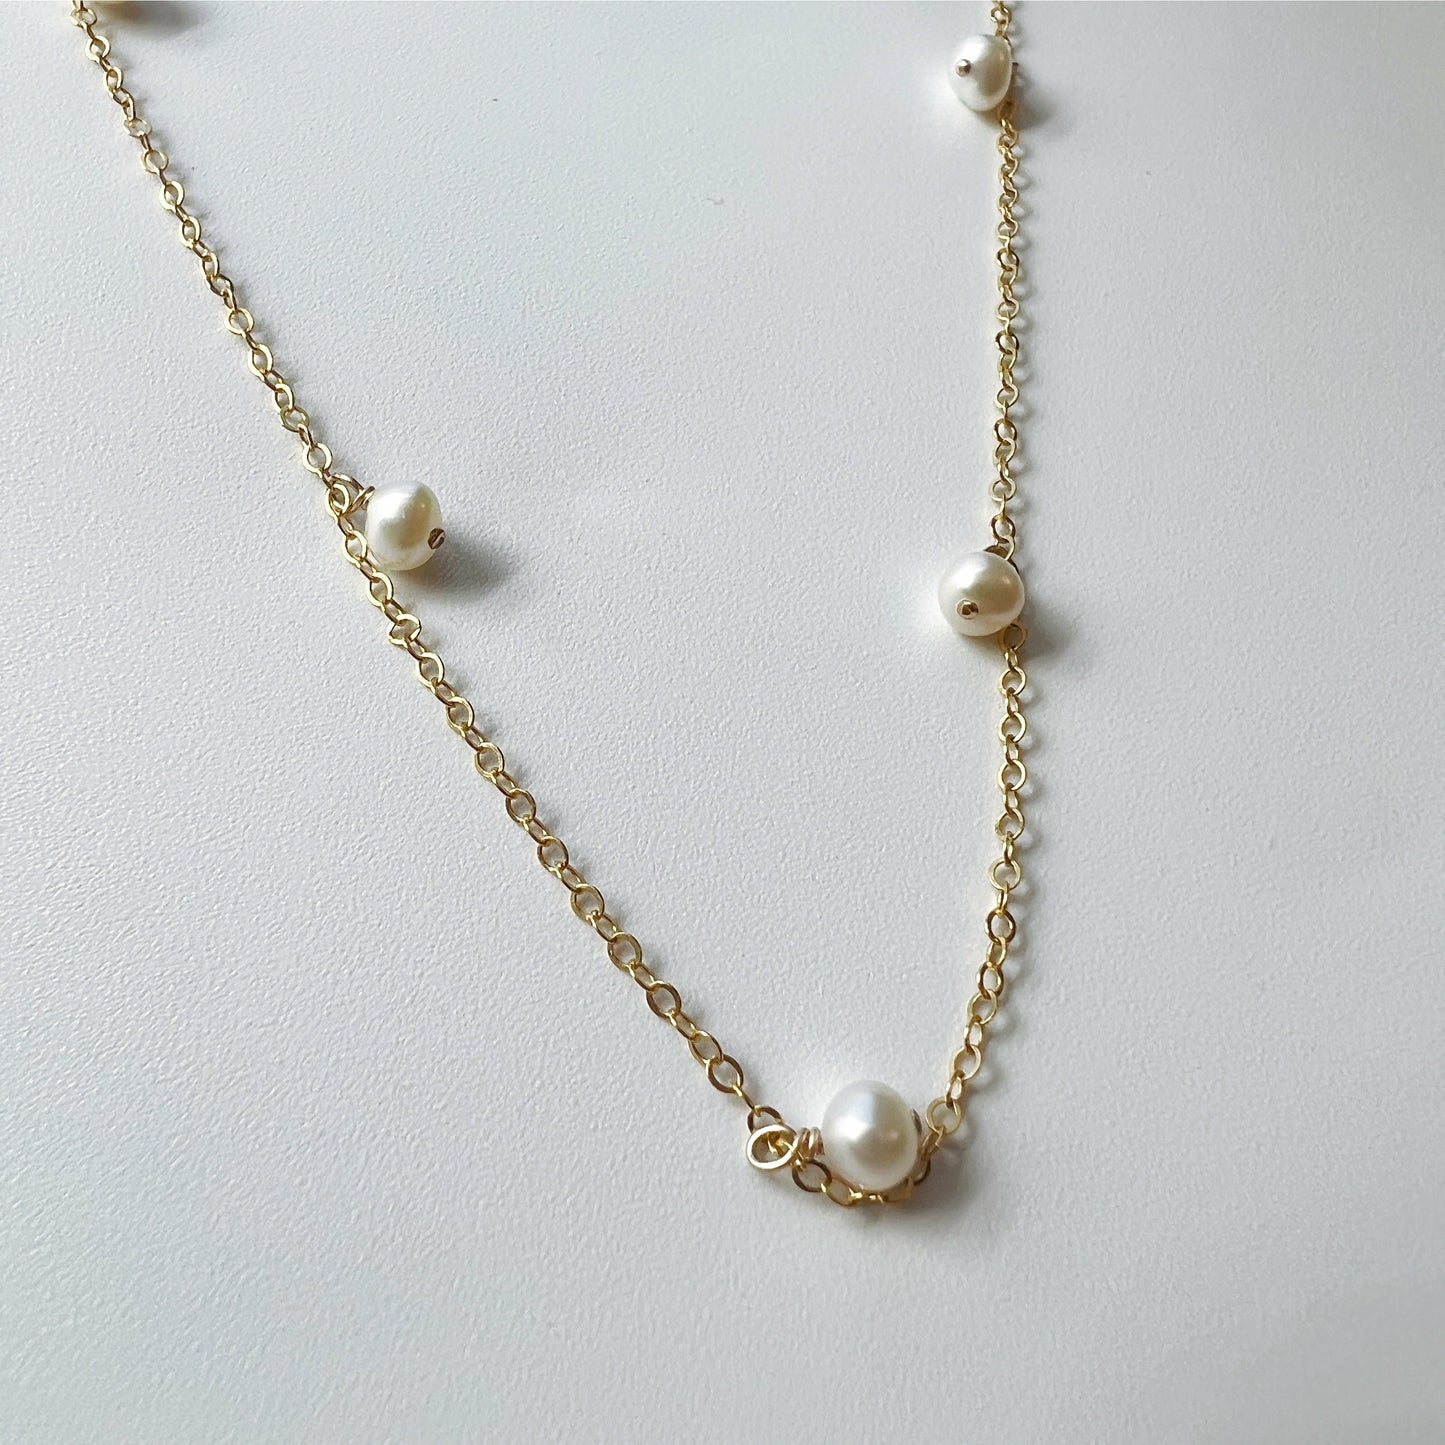 Dainty Pearls Necklace